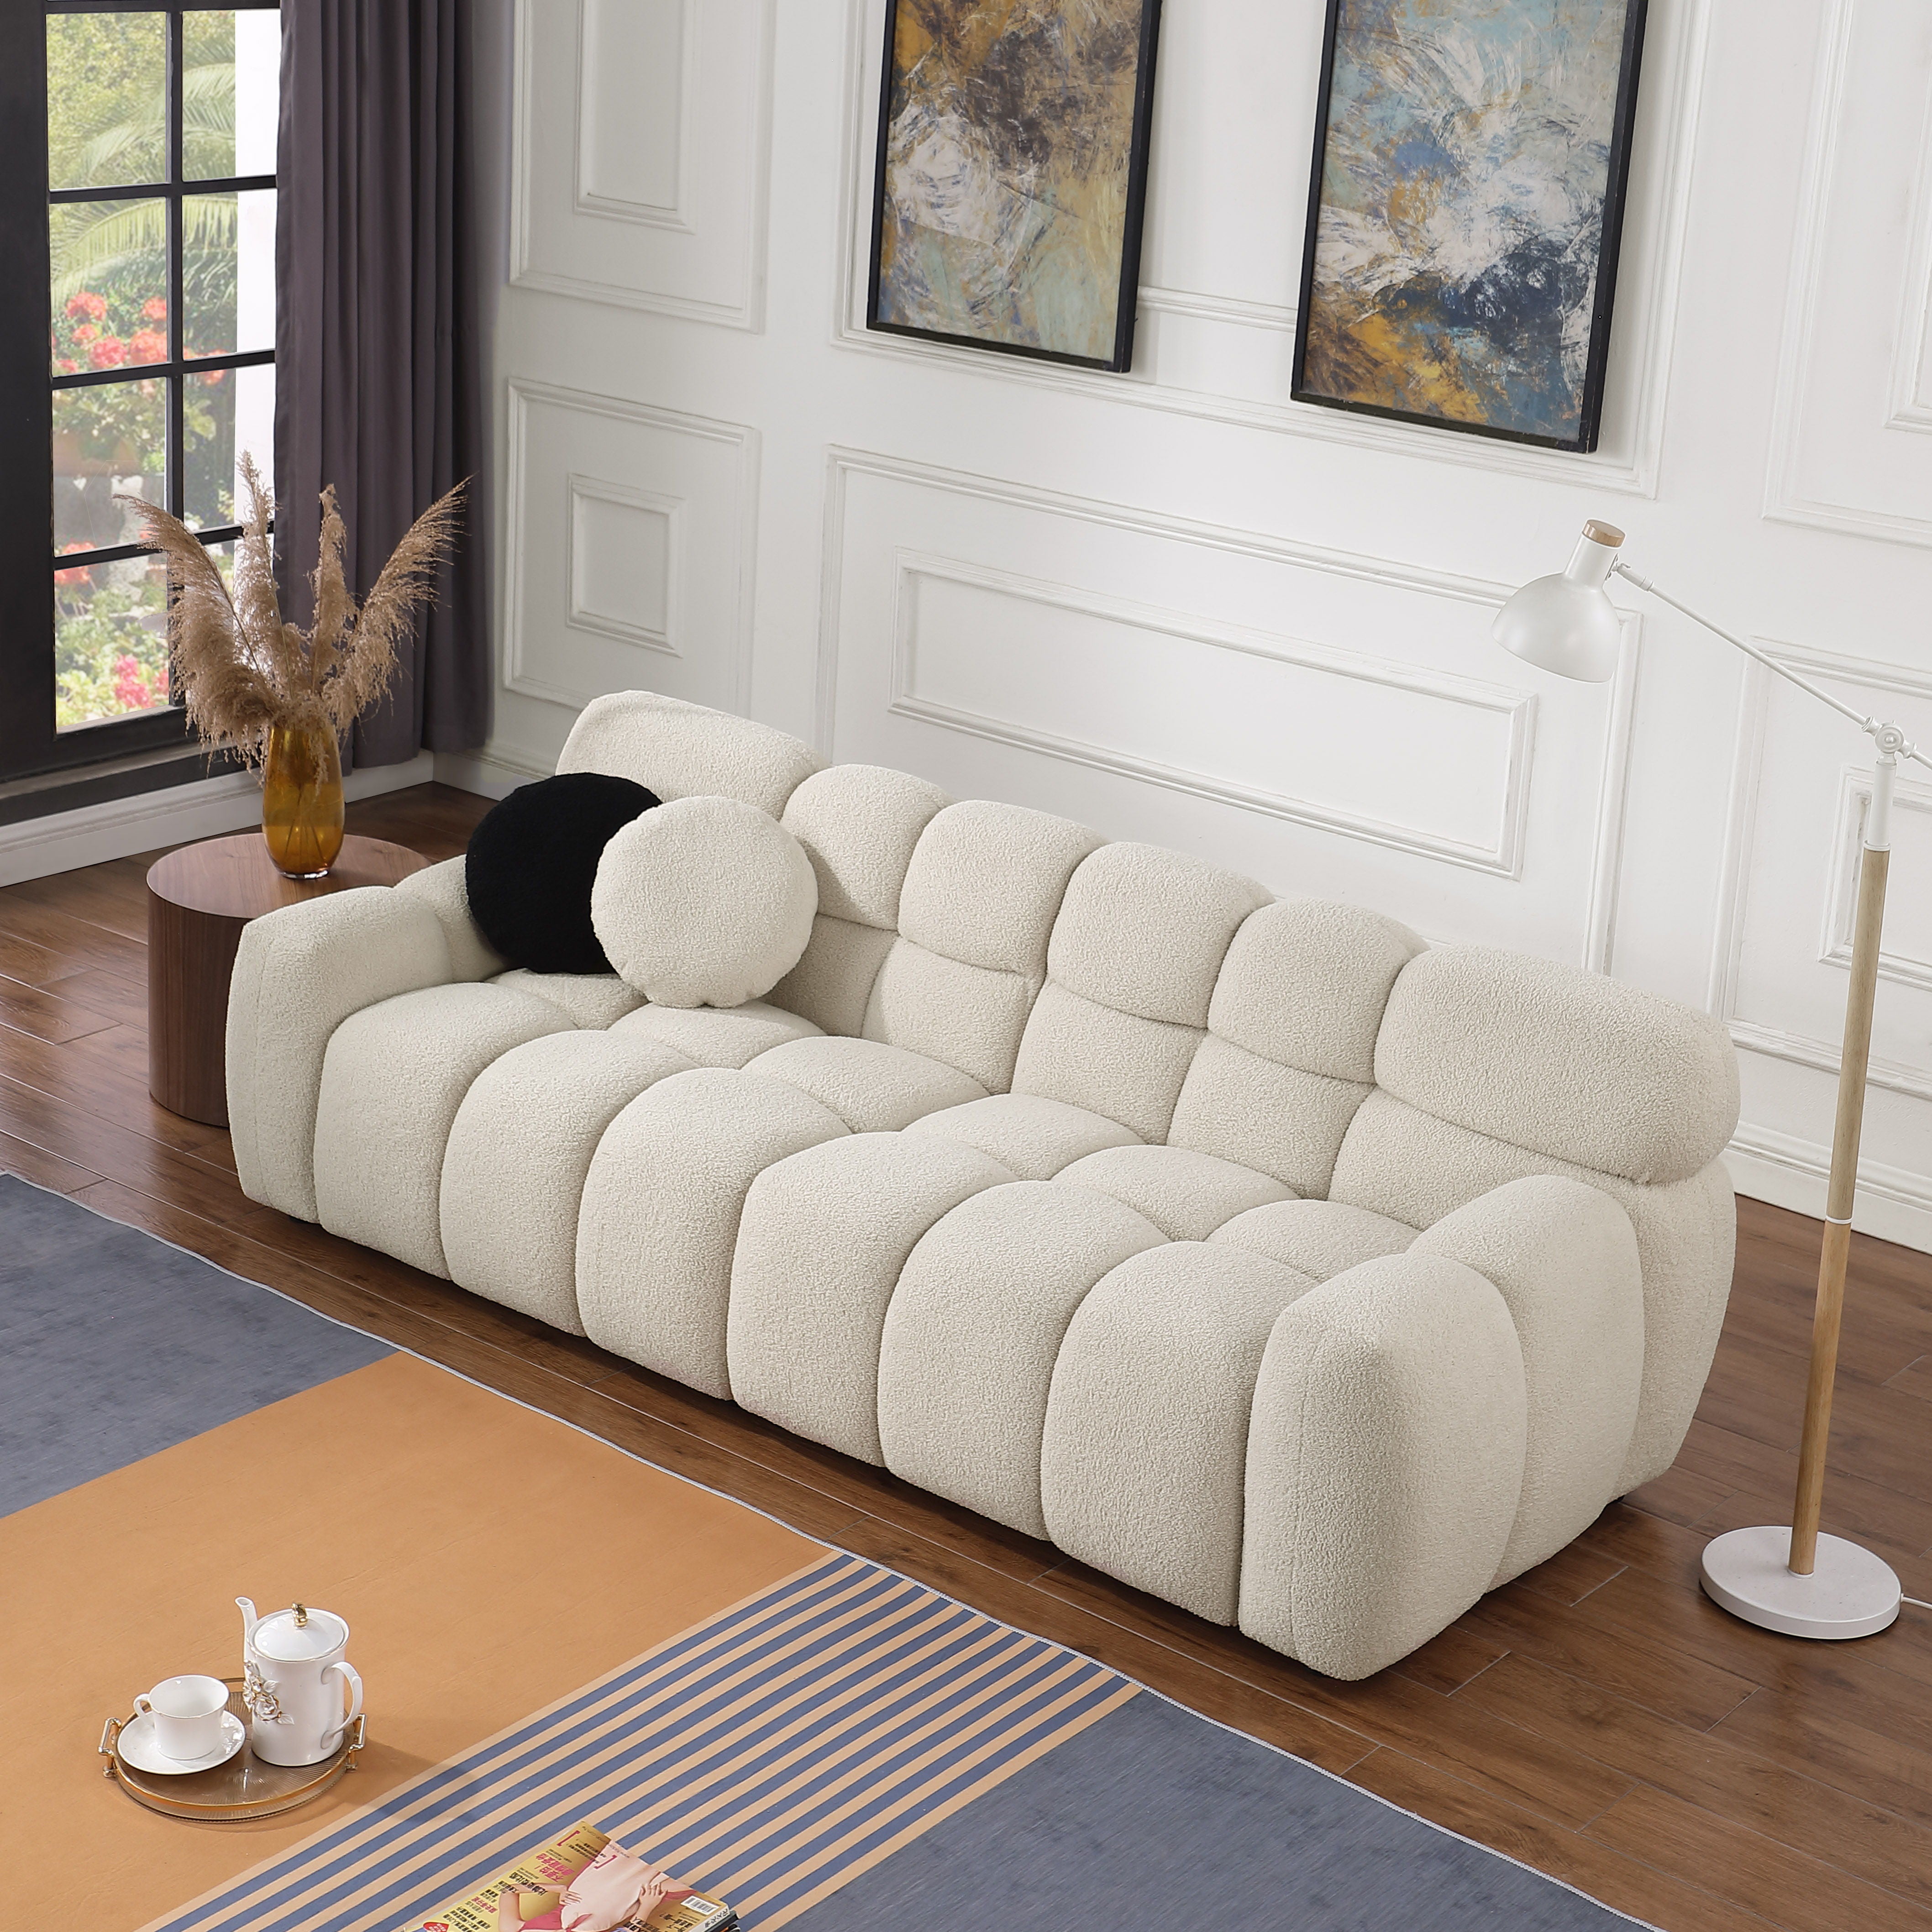 87.4 Length, 35.83" Deepth, Human Body Structure For Usa People, Marshmallow Sofa, Boucle Sofa, 3 Seater, Beige Boucle